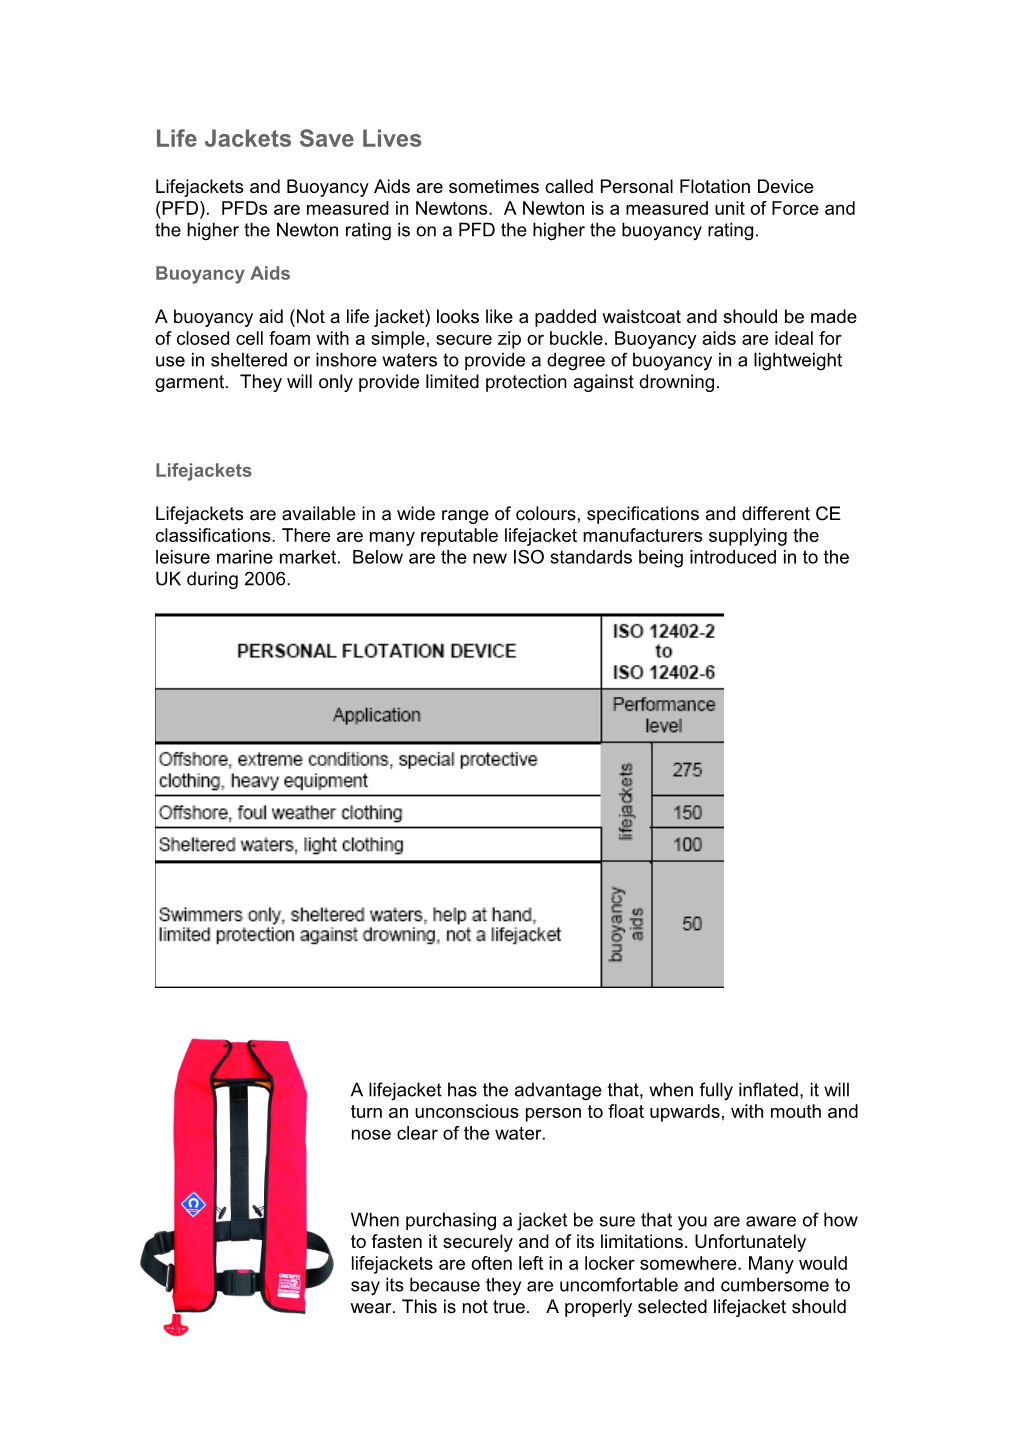 Lifejackets, Especially Automatic Types, Come in a Wide Range of Colours, Specifications